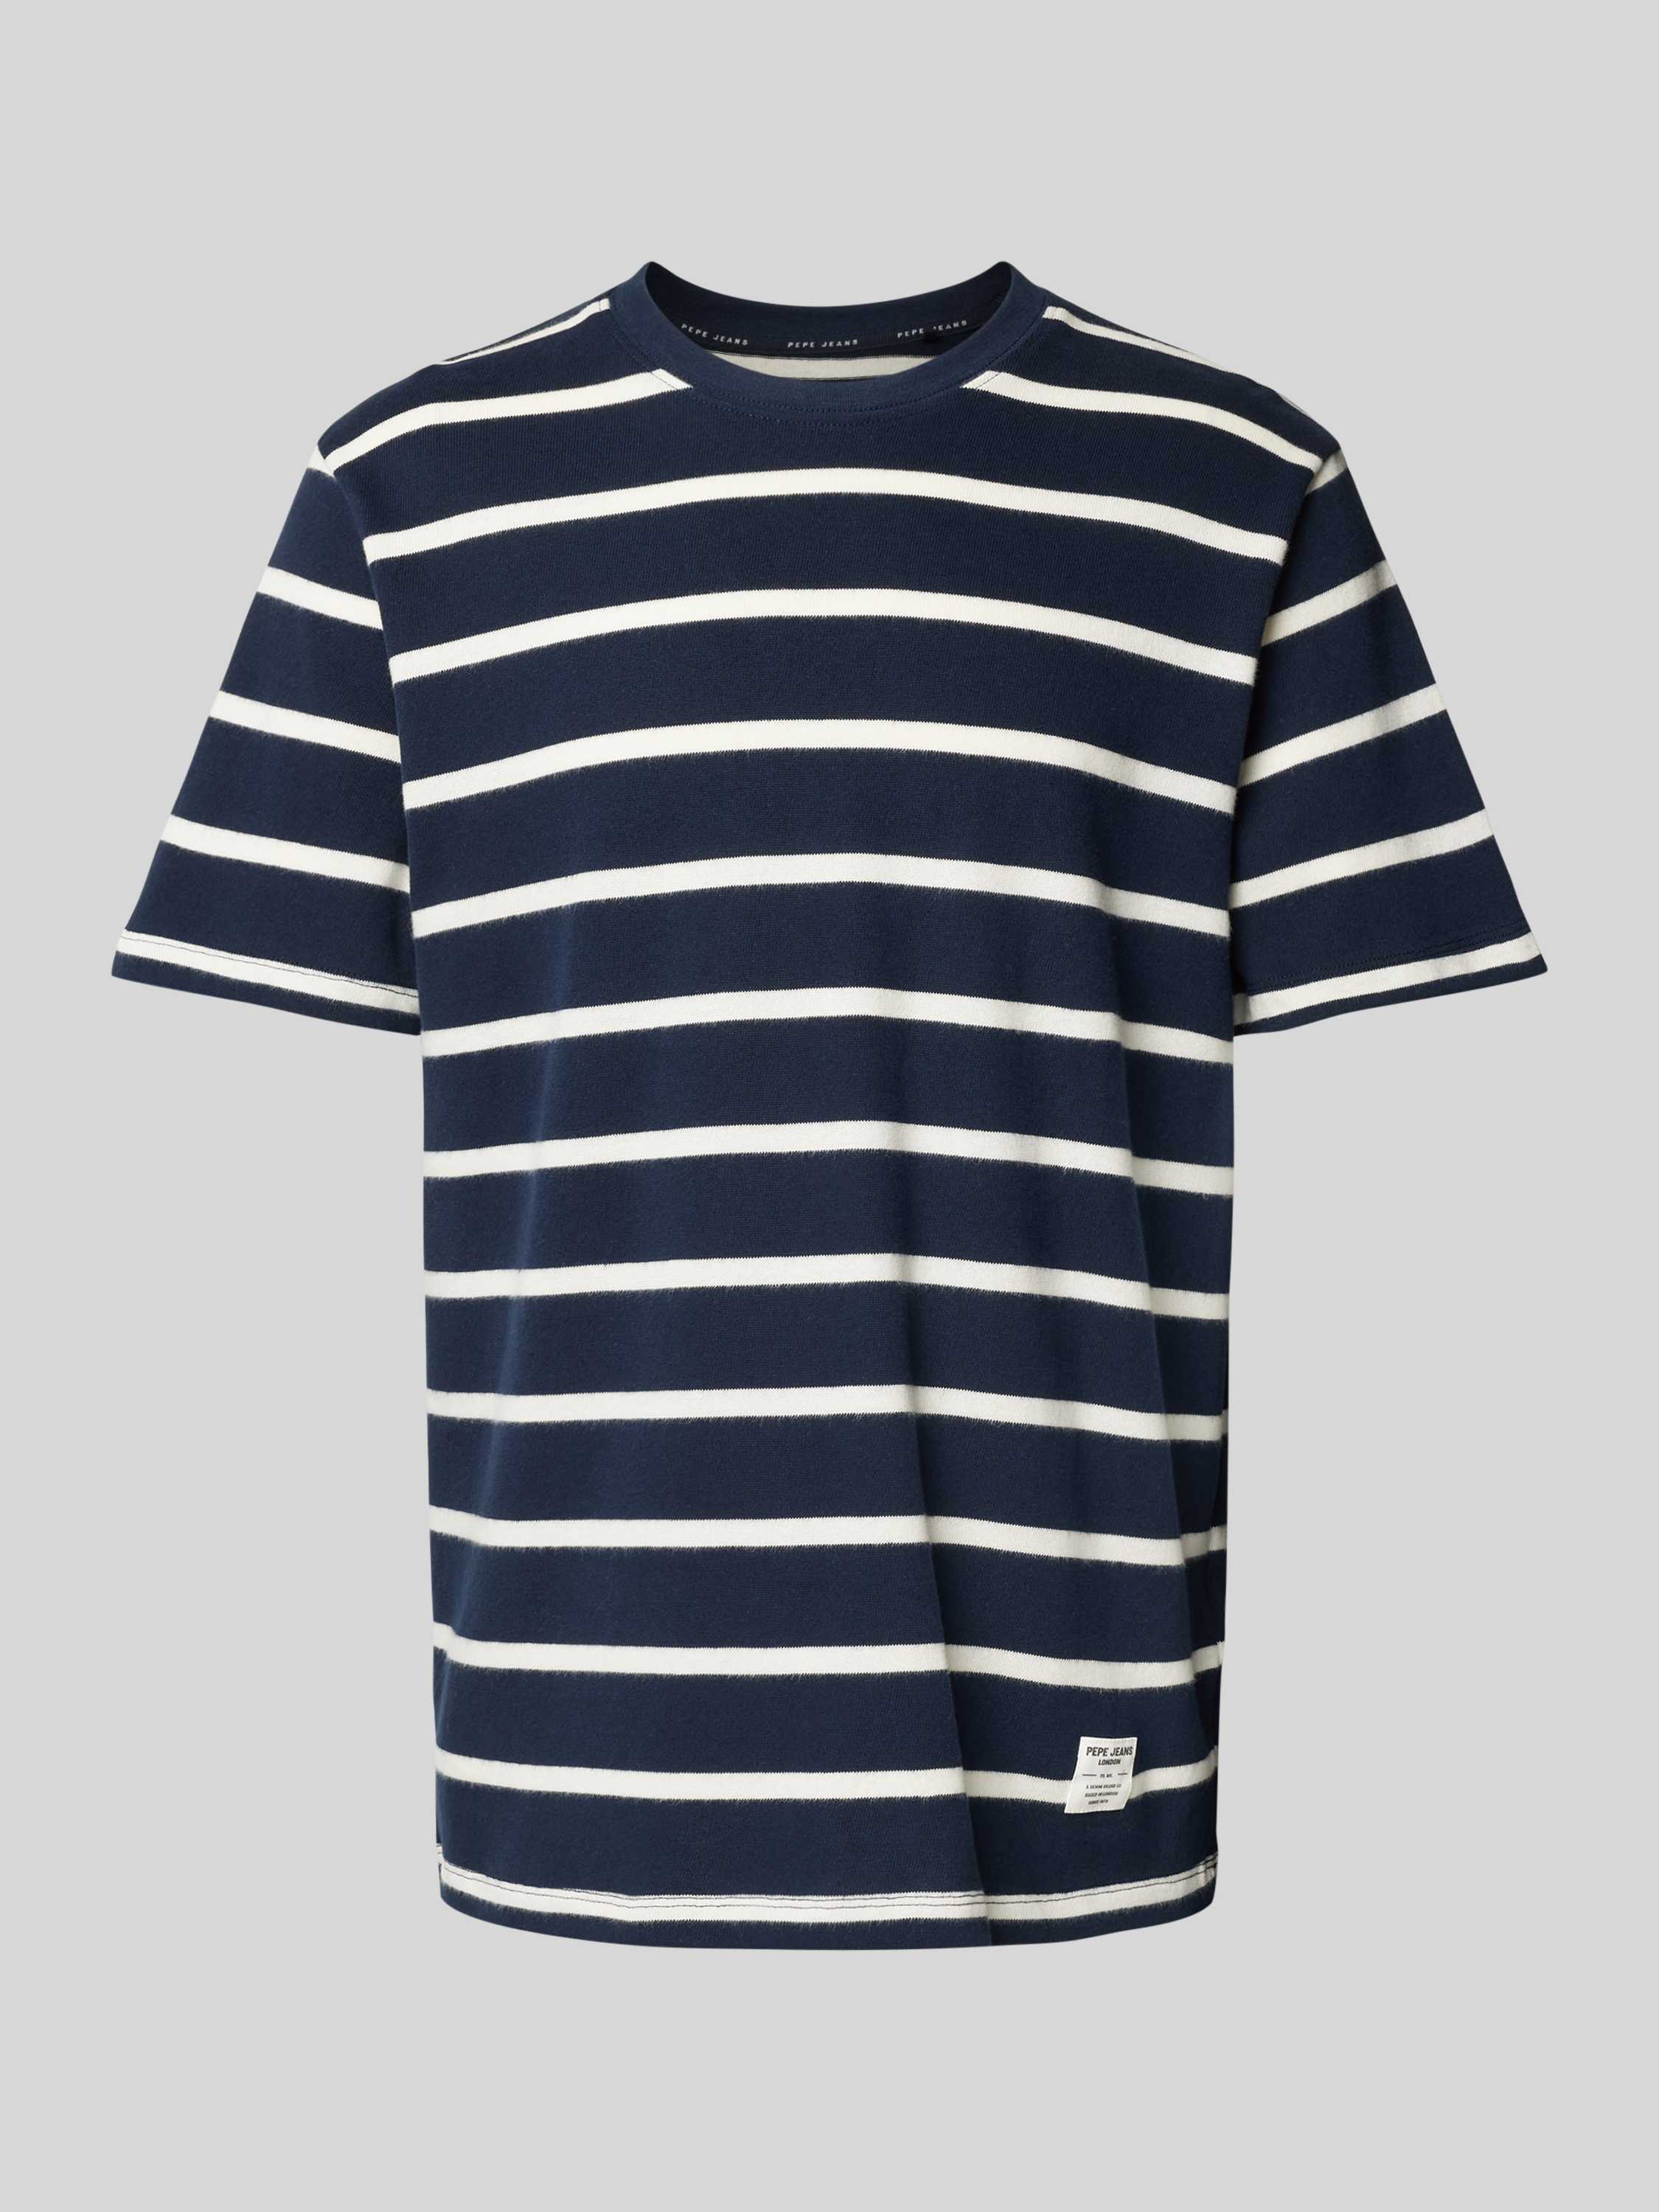 Pepe Jeans T-shirt met labelpatch model 'Alessandro'